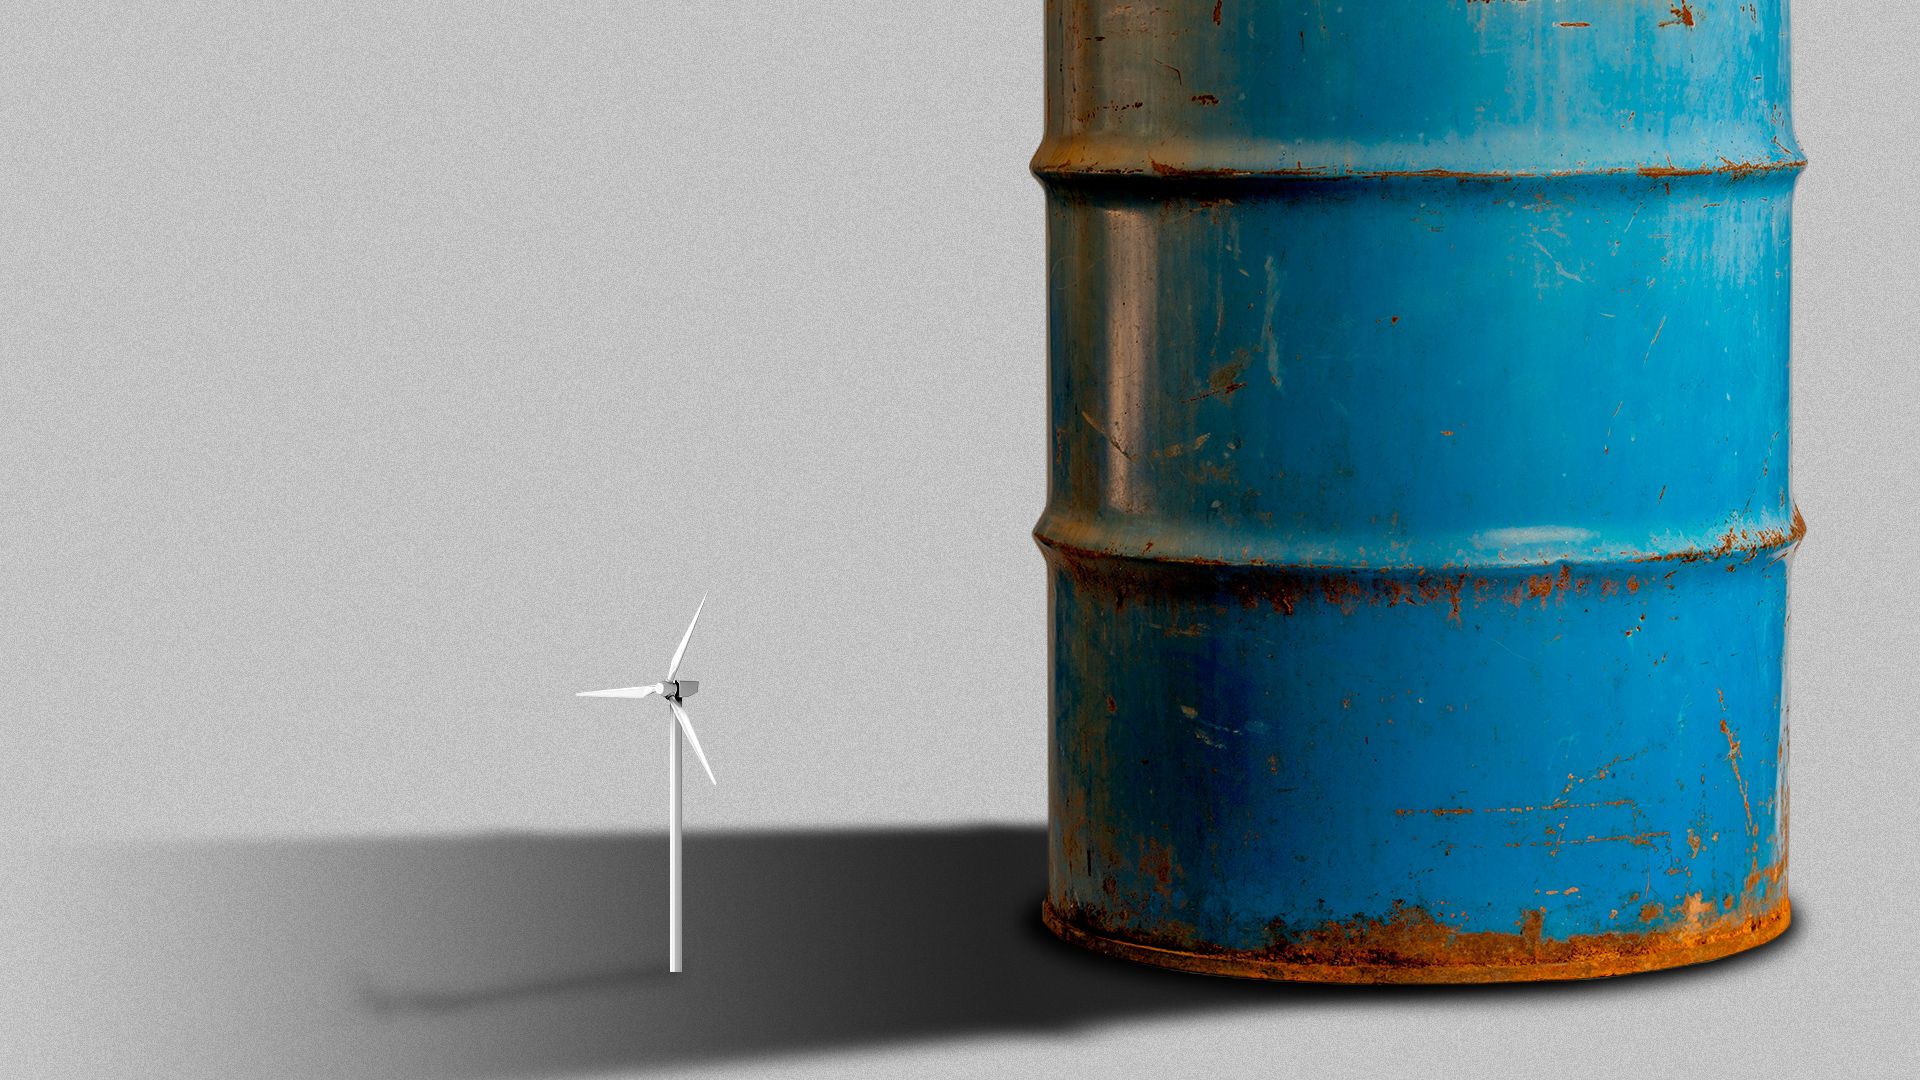 Illustration of a large oil barrel casting a shadow over a tiny wind turbine